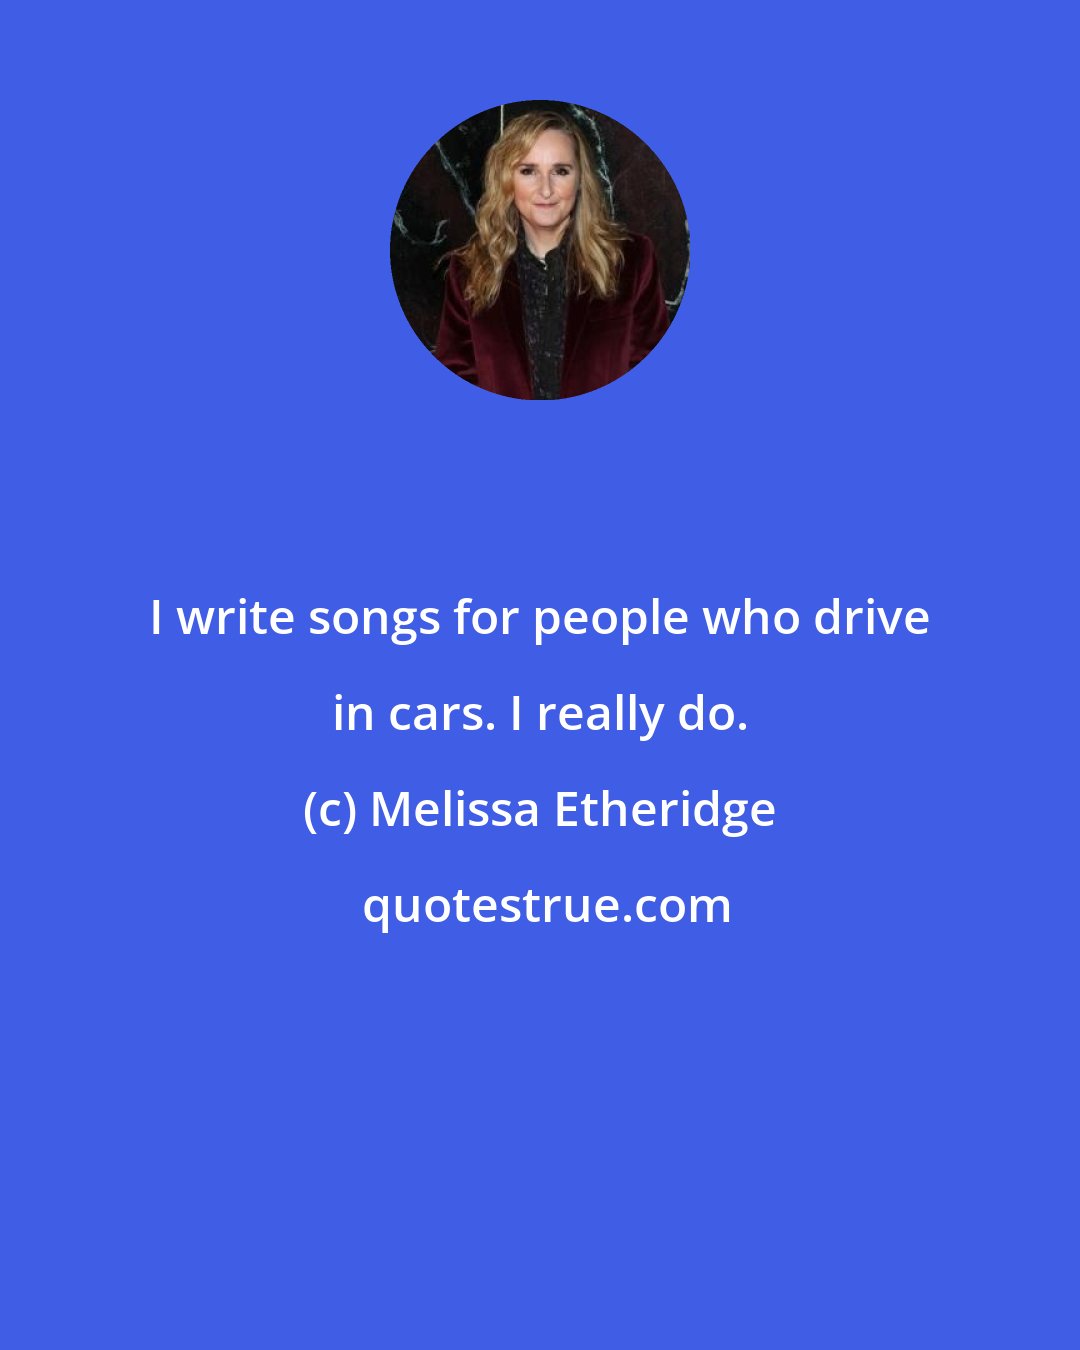 Melissa Etheridge: I write songs for people who drive in cars. I really do.